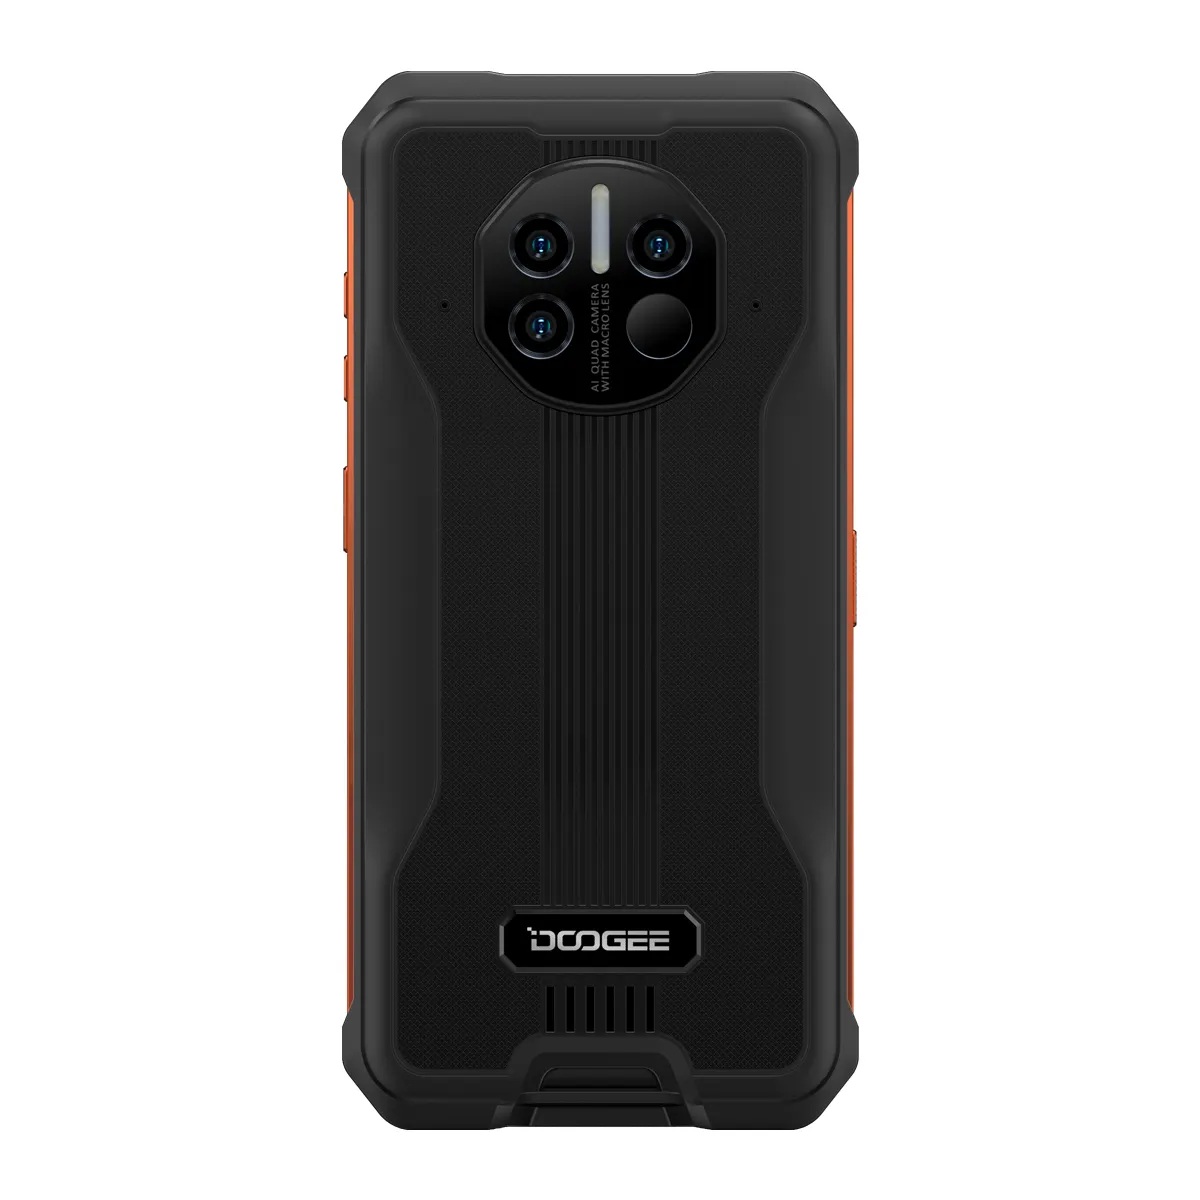 Original DOOGEE V10 Android 11 smartphone 6.39 inches 8+128GB 33W fast charging fingerprint unlock dual 5G Mobile phones